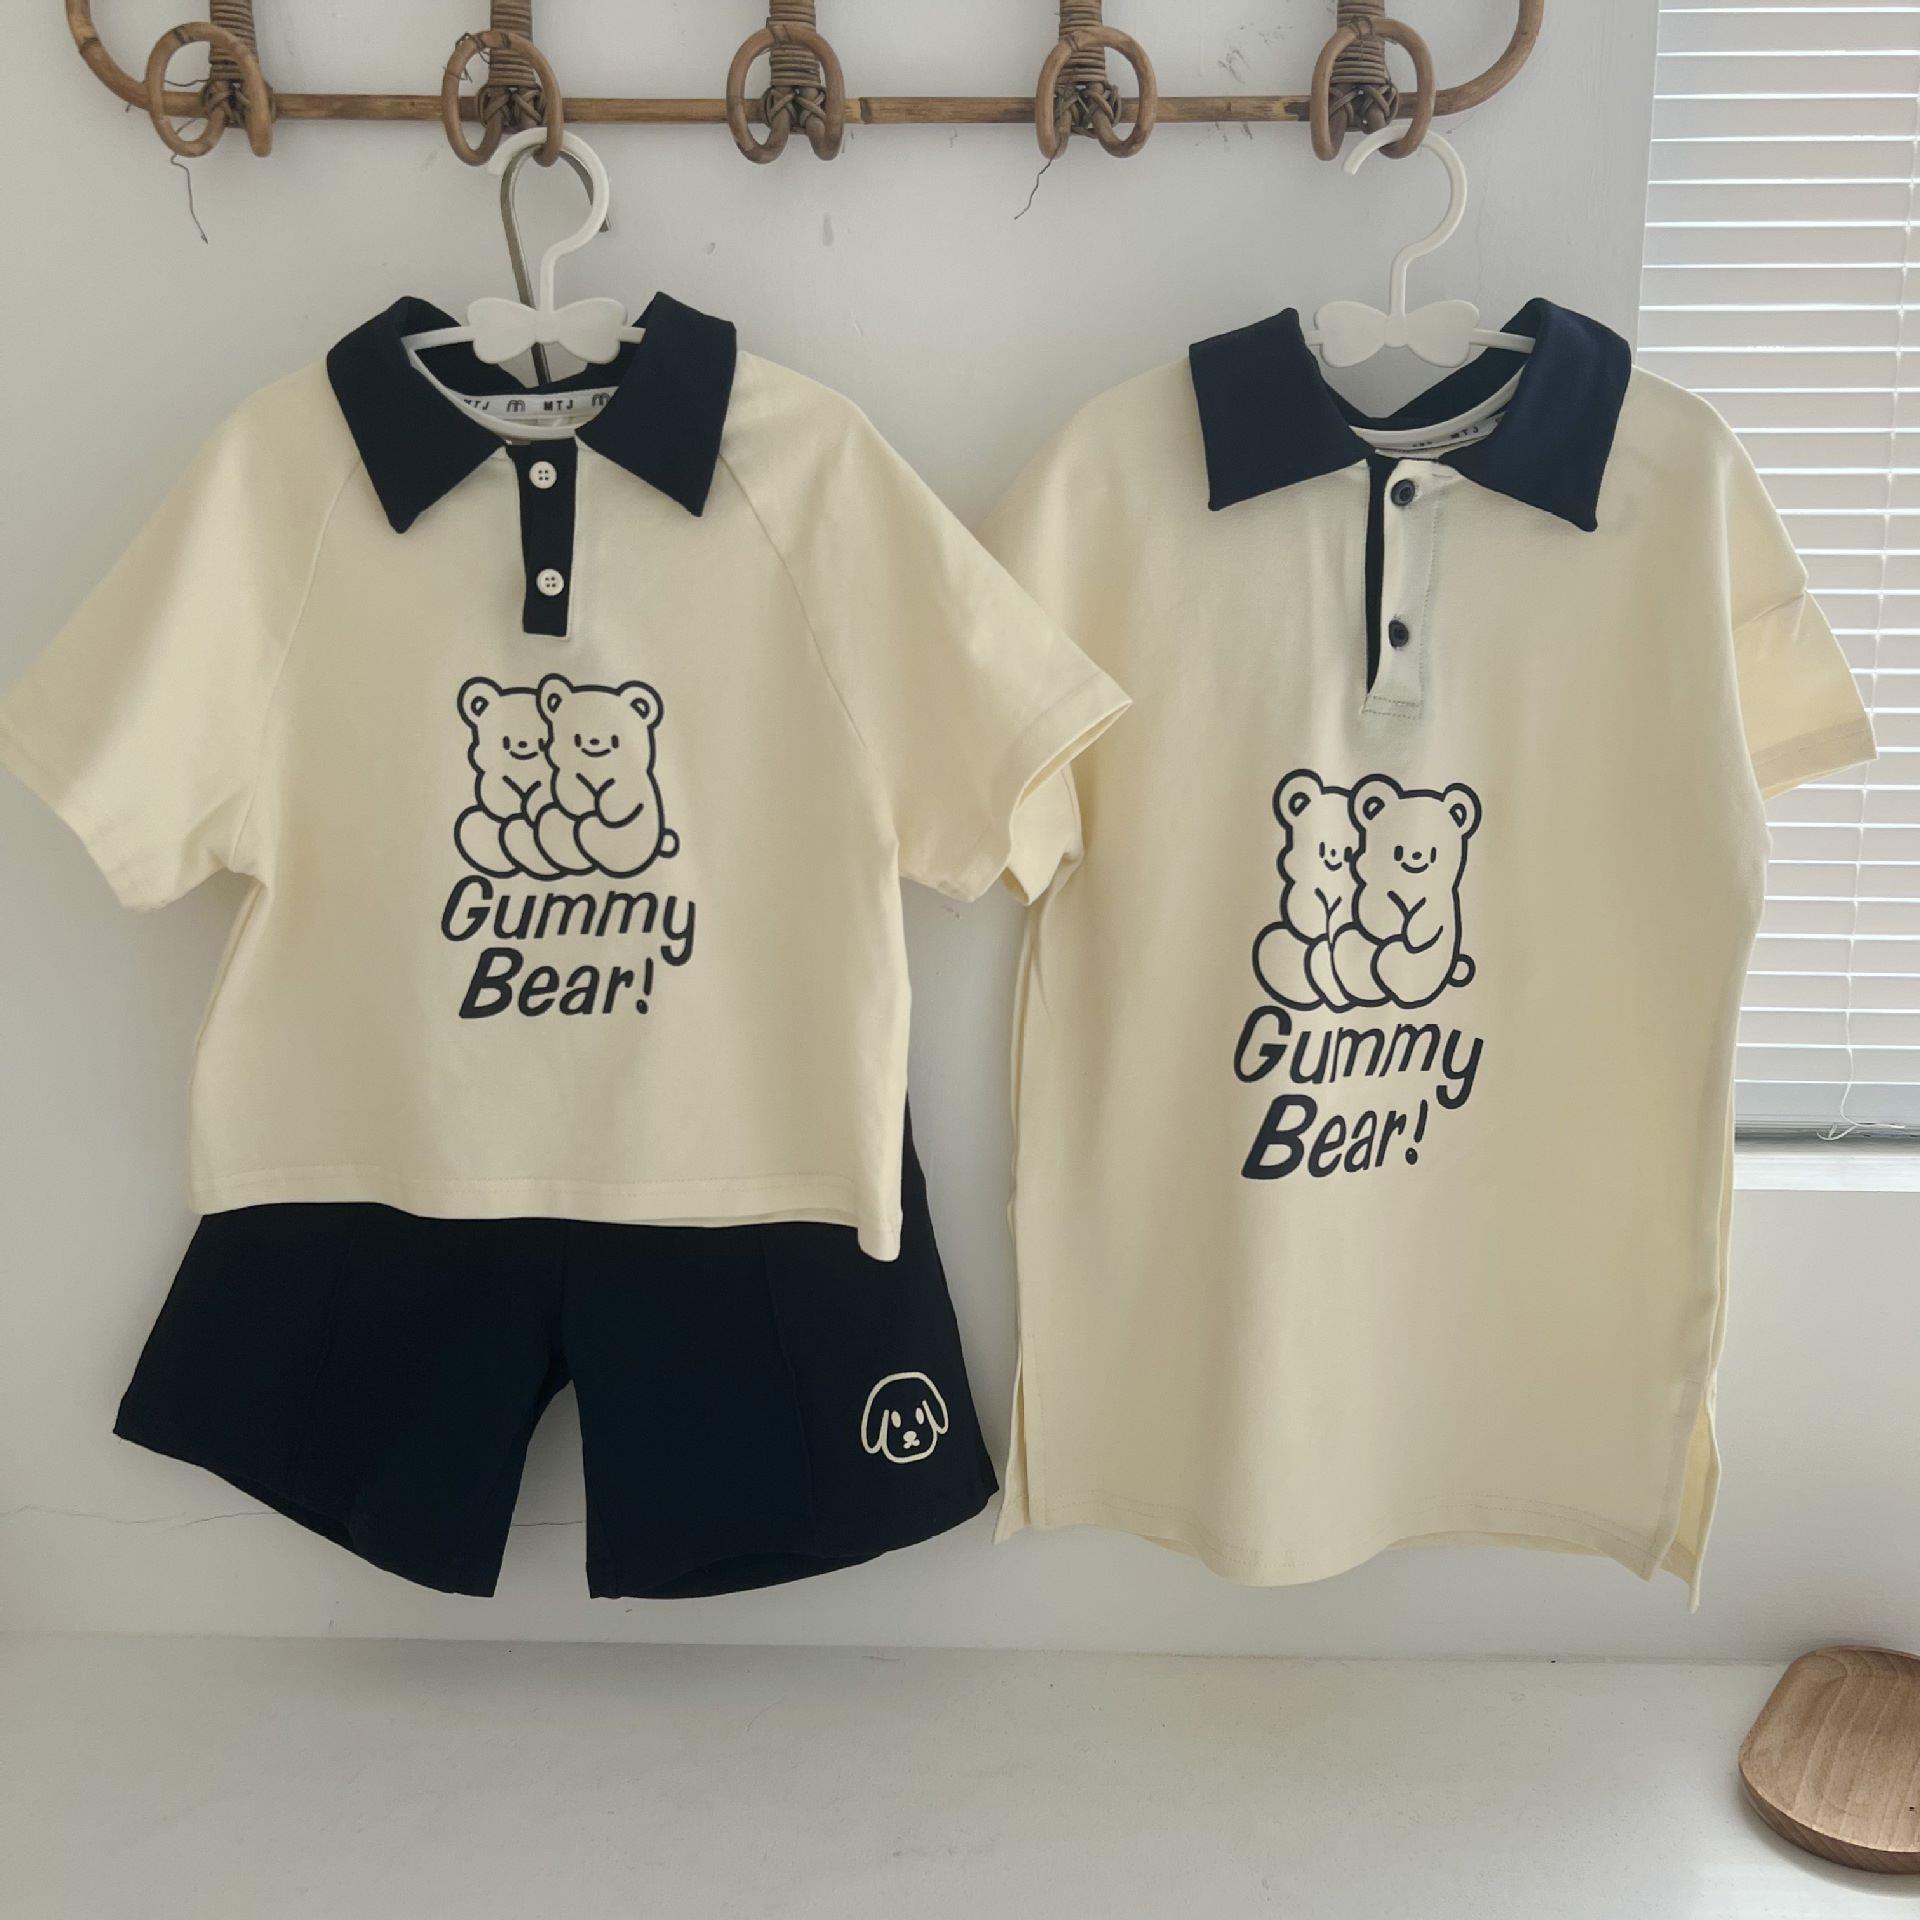 Summer children's clothing children's suit summer 23 new Korean version of brother and sister clothing men and women casual shorts sweater skirt suit